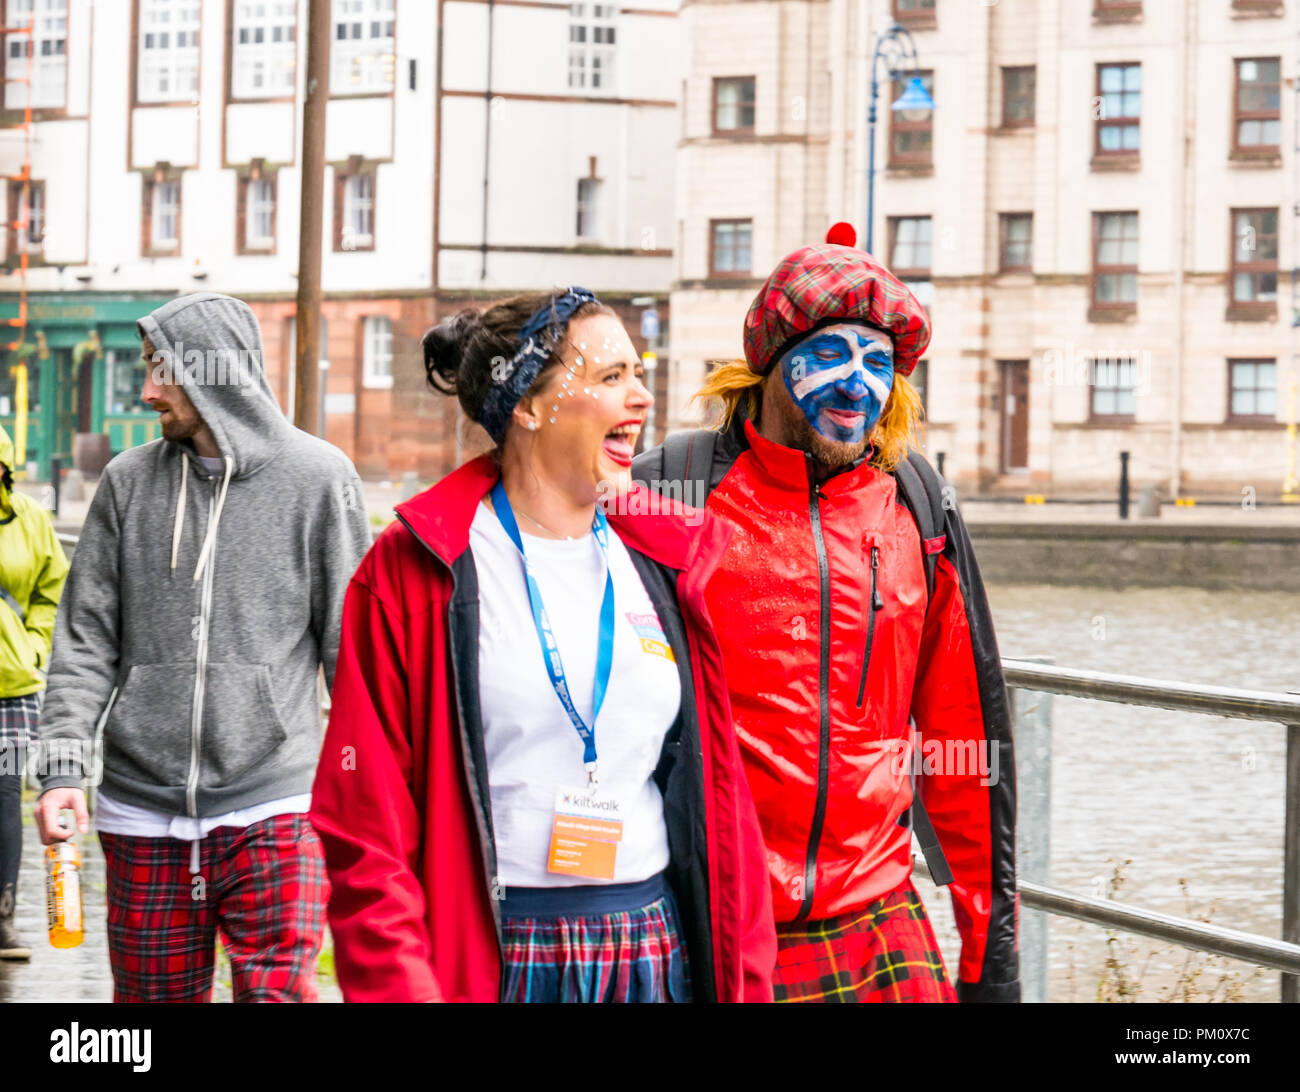 Leith, Edinburgh, Scotland, UK, 16th September 2018. Edinburgh Kilt Walk, sponsored by the Royal Bank of Scotland, takes place today. Walkers raise funds for a charity of their choice. The kilt walkers reach The Shore at about Mile 14 in the rain. A couple laughing as they walk on the riverbank. The man is wearing a See you Jimmy tartan hat and has a saltire painted on his face Stock Photo